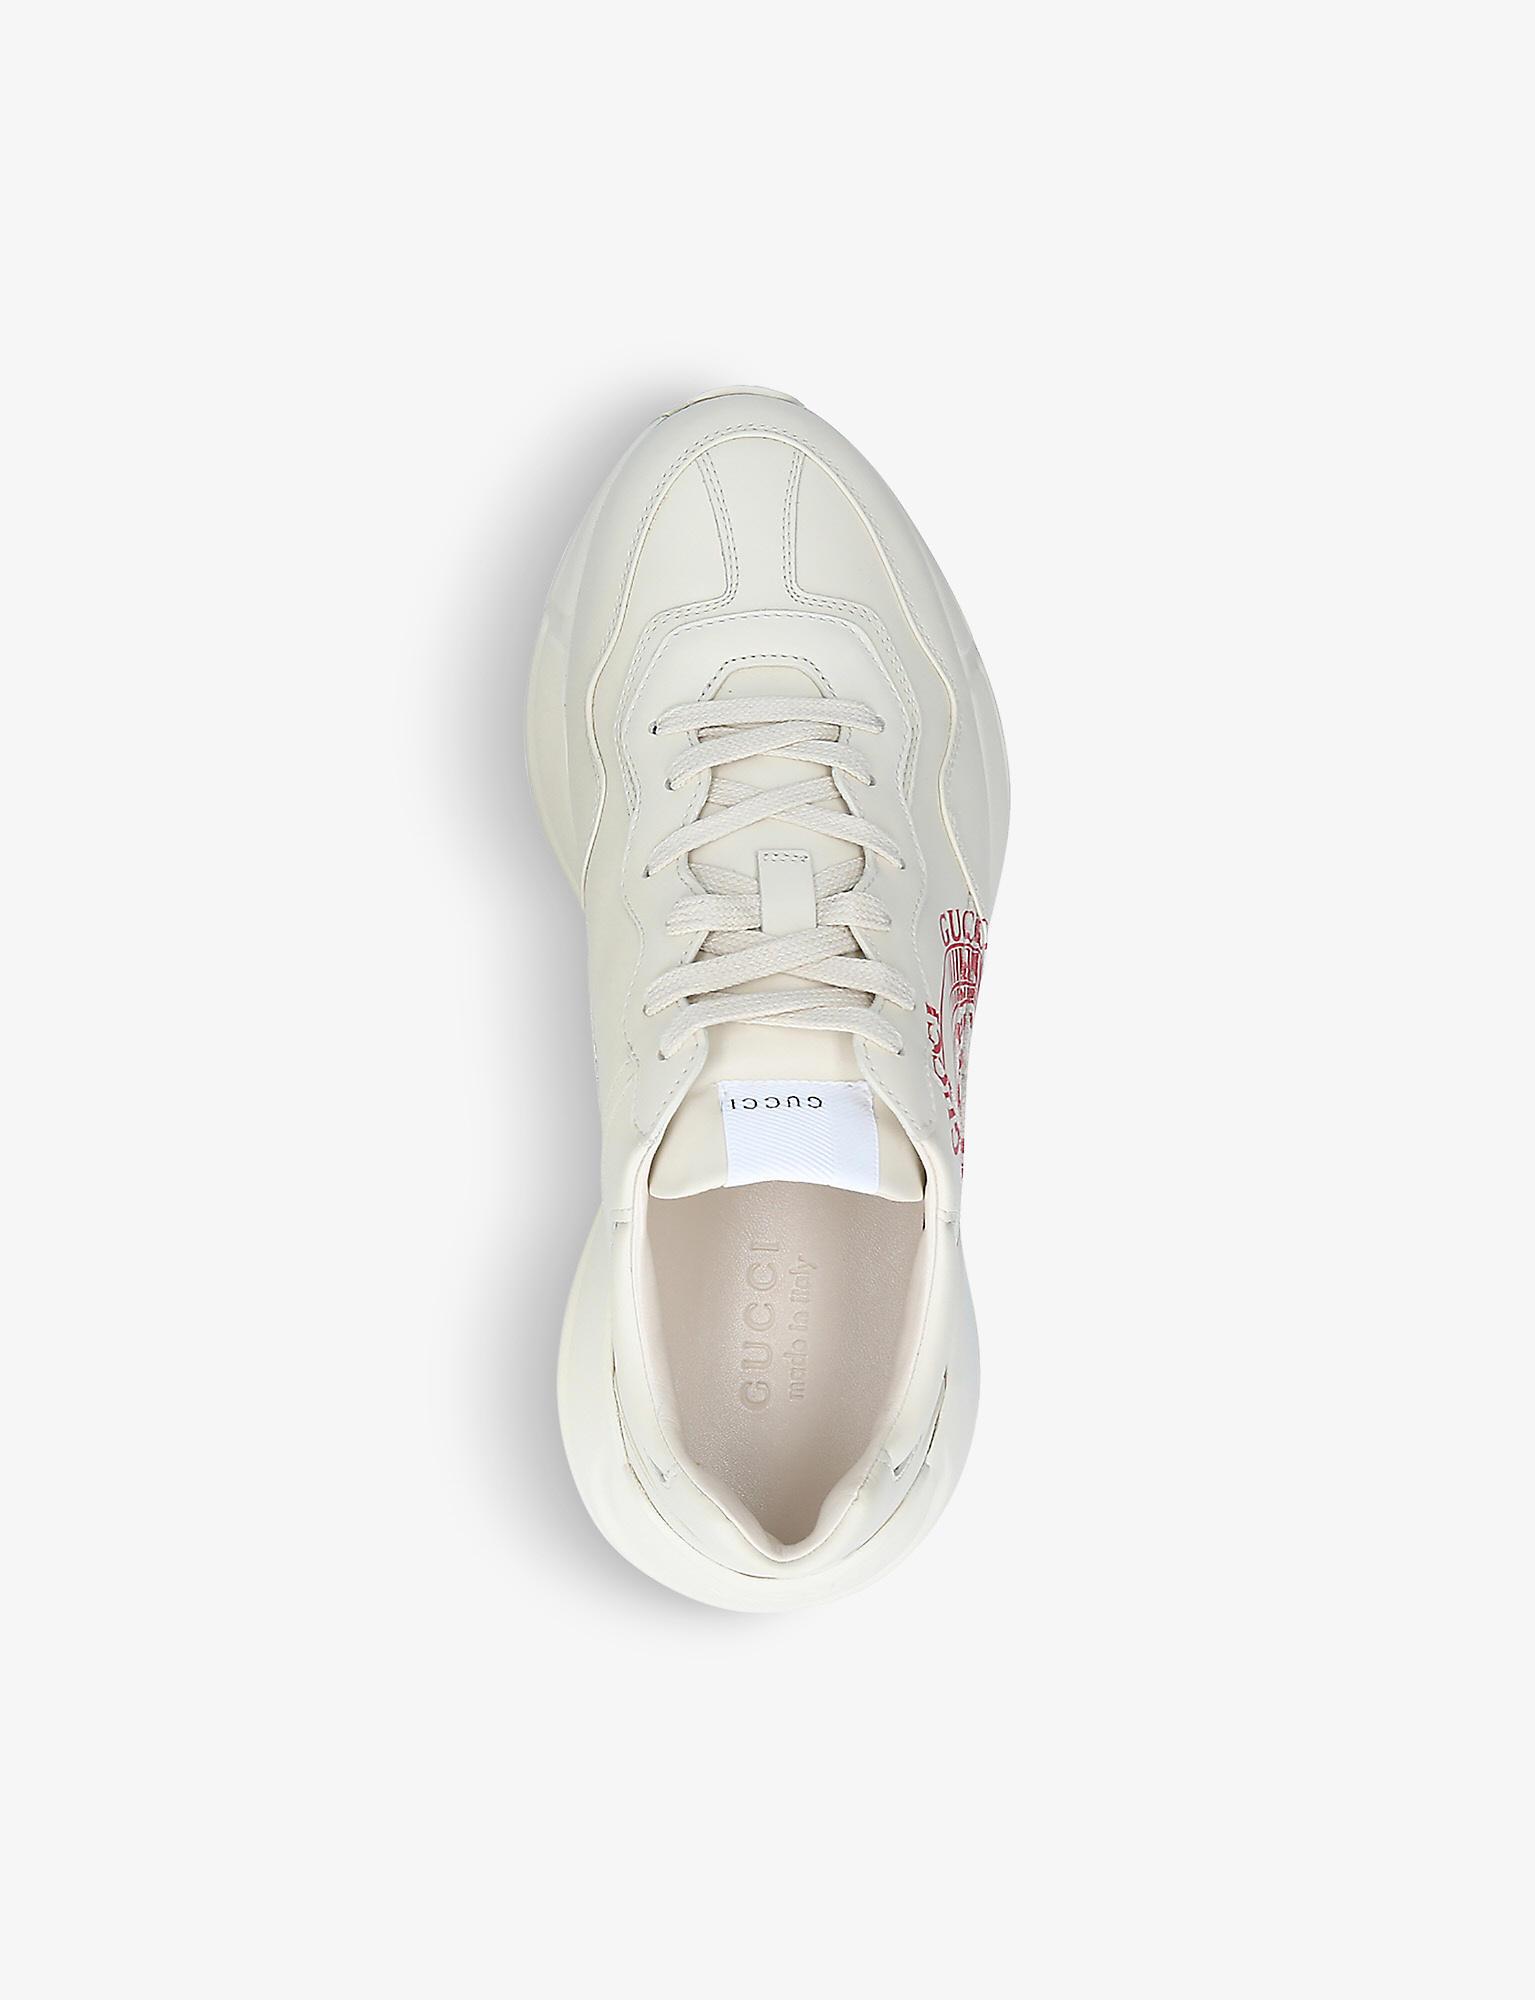 Gucci Rhyton Printed Leather Sneaker in Natural for Men | Lyst